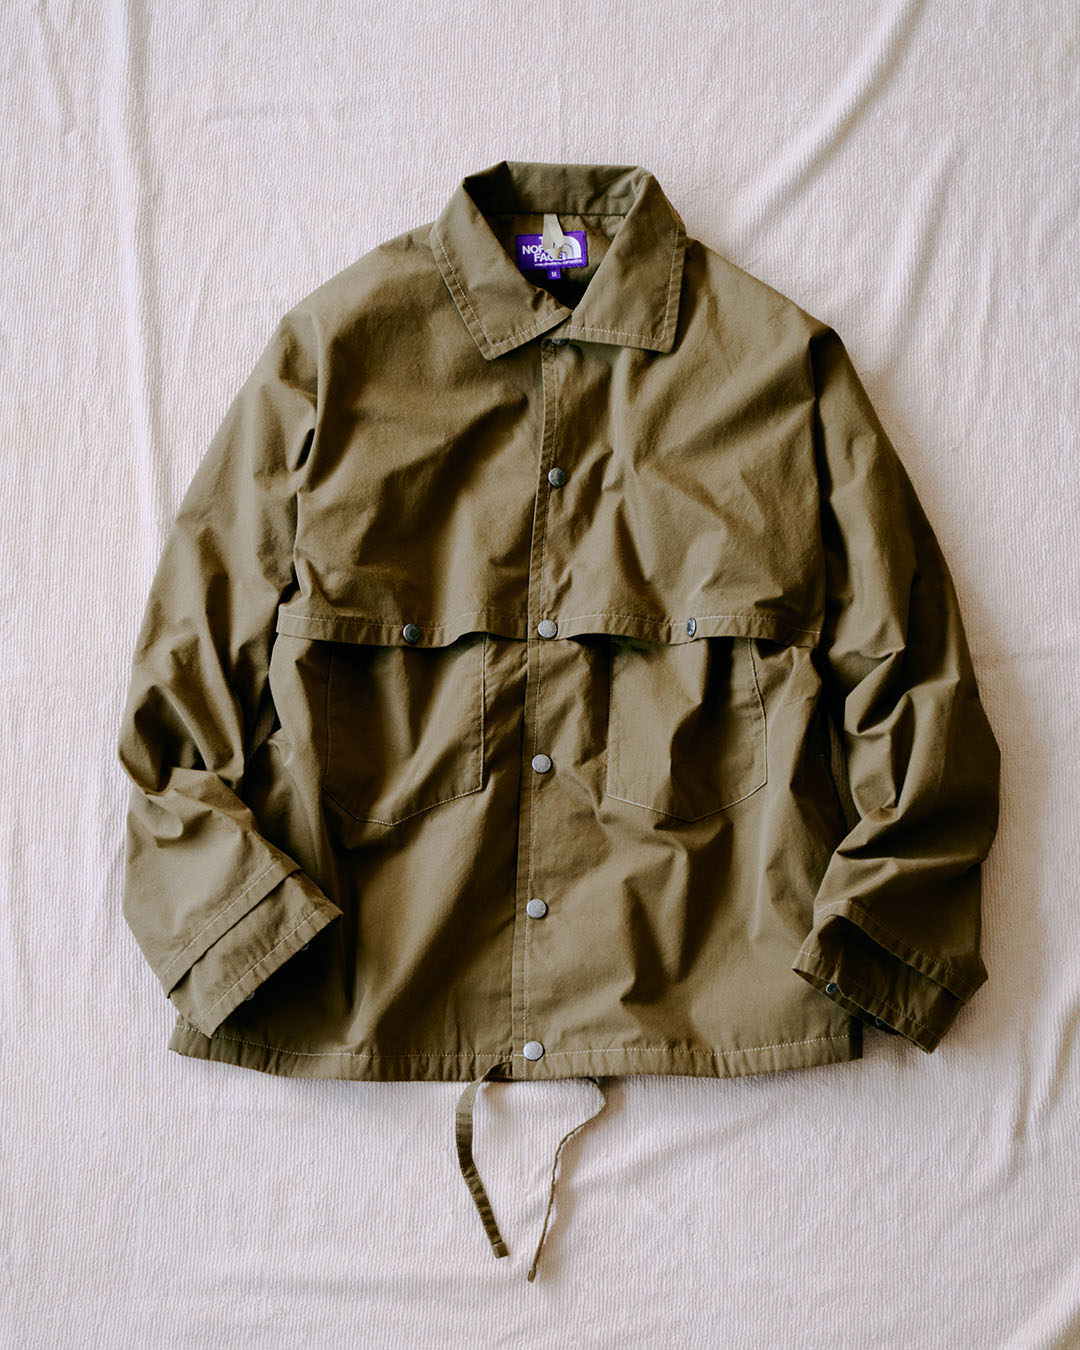 THE NORTH FACE PURPLE LABEL / Featured Product vol…